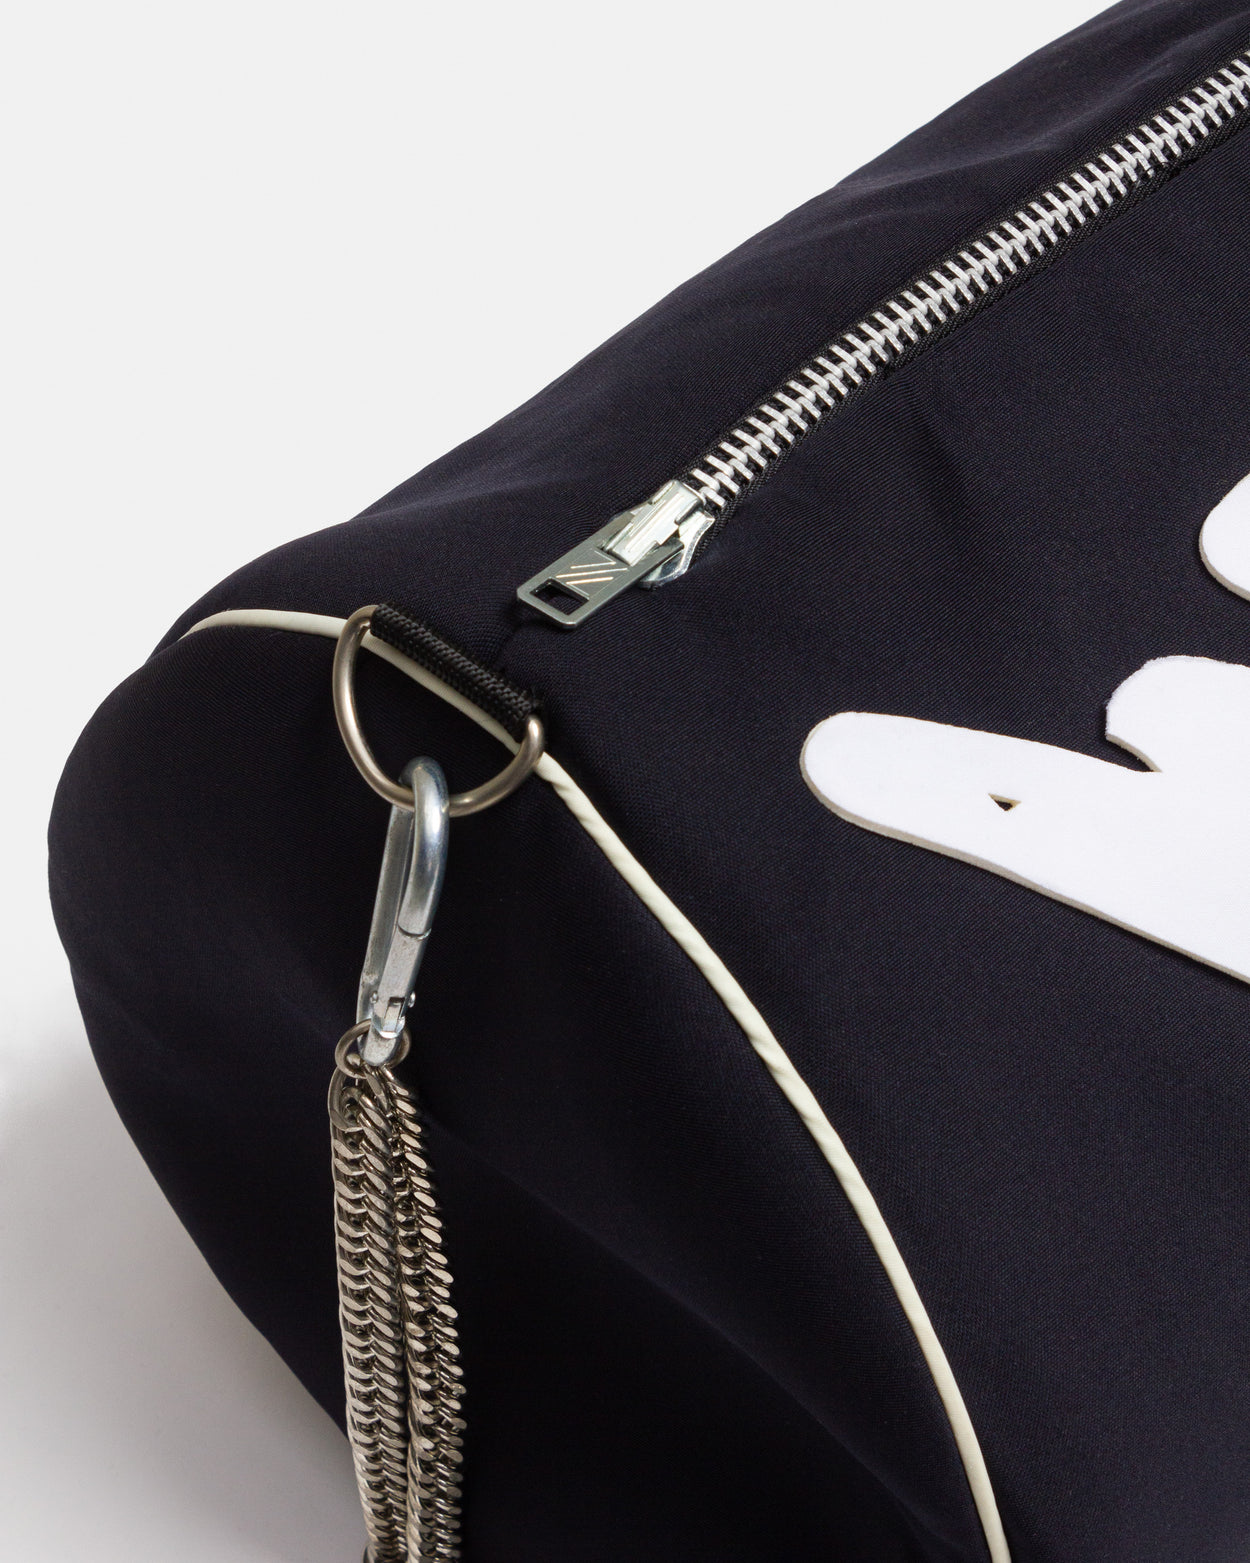 The Coded Gym Bag